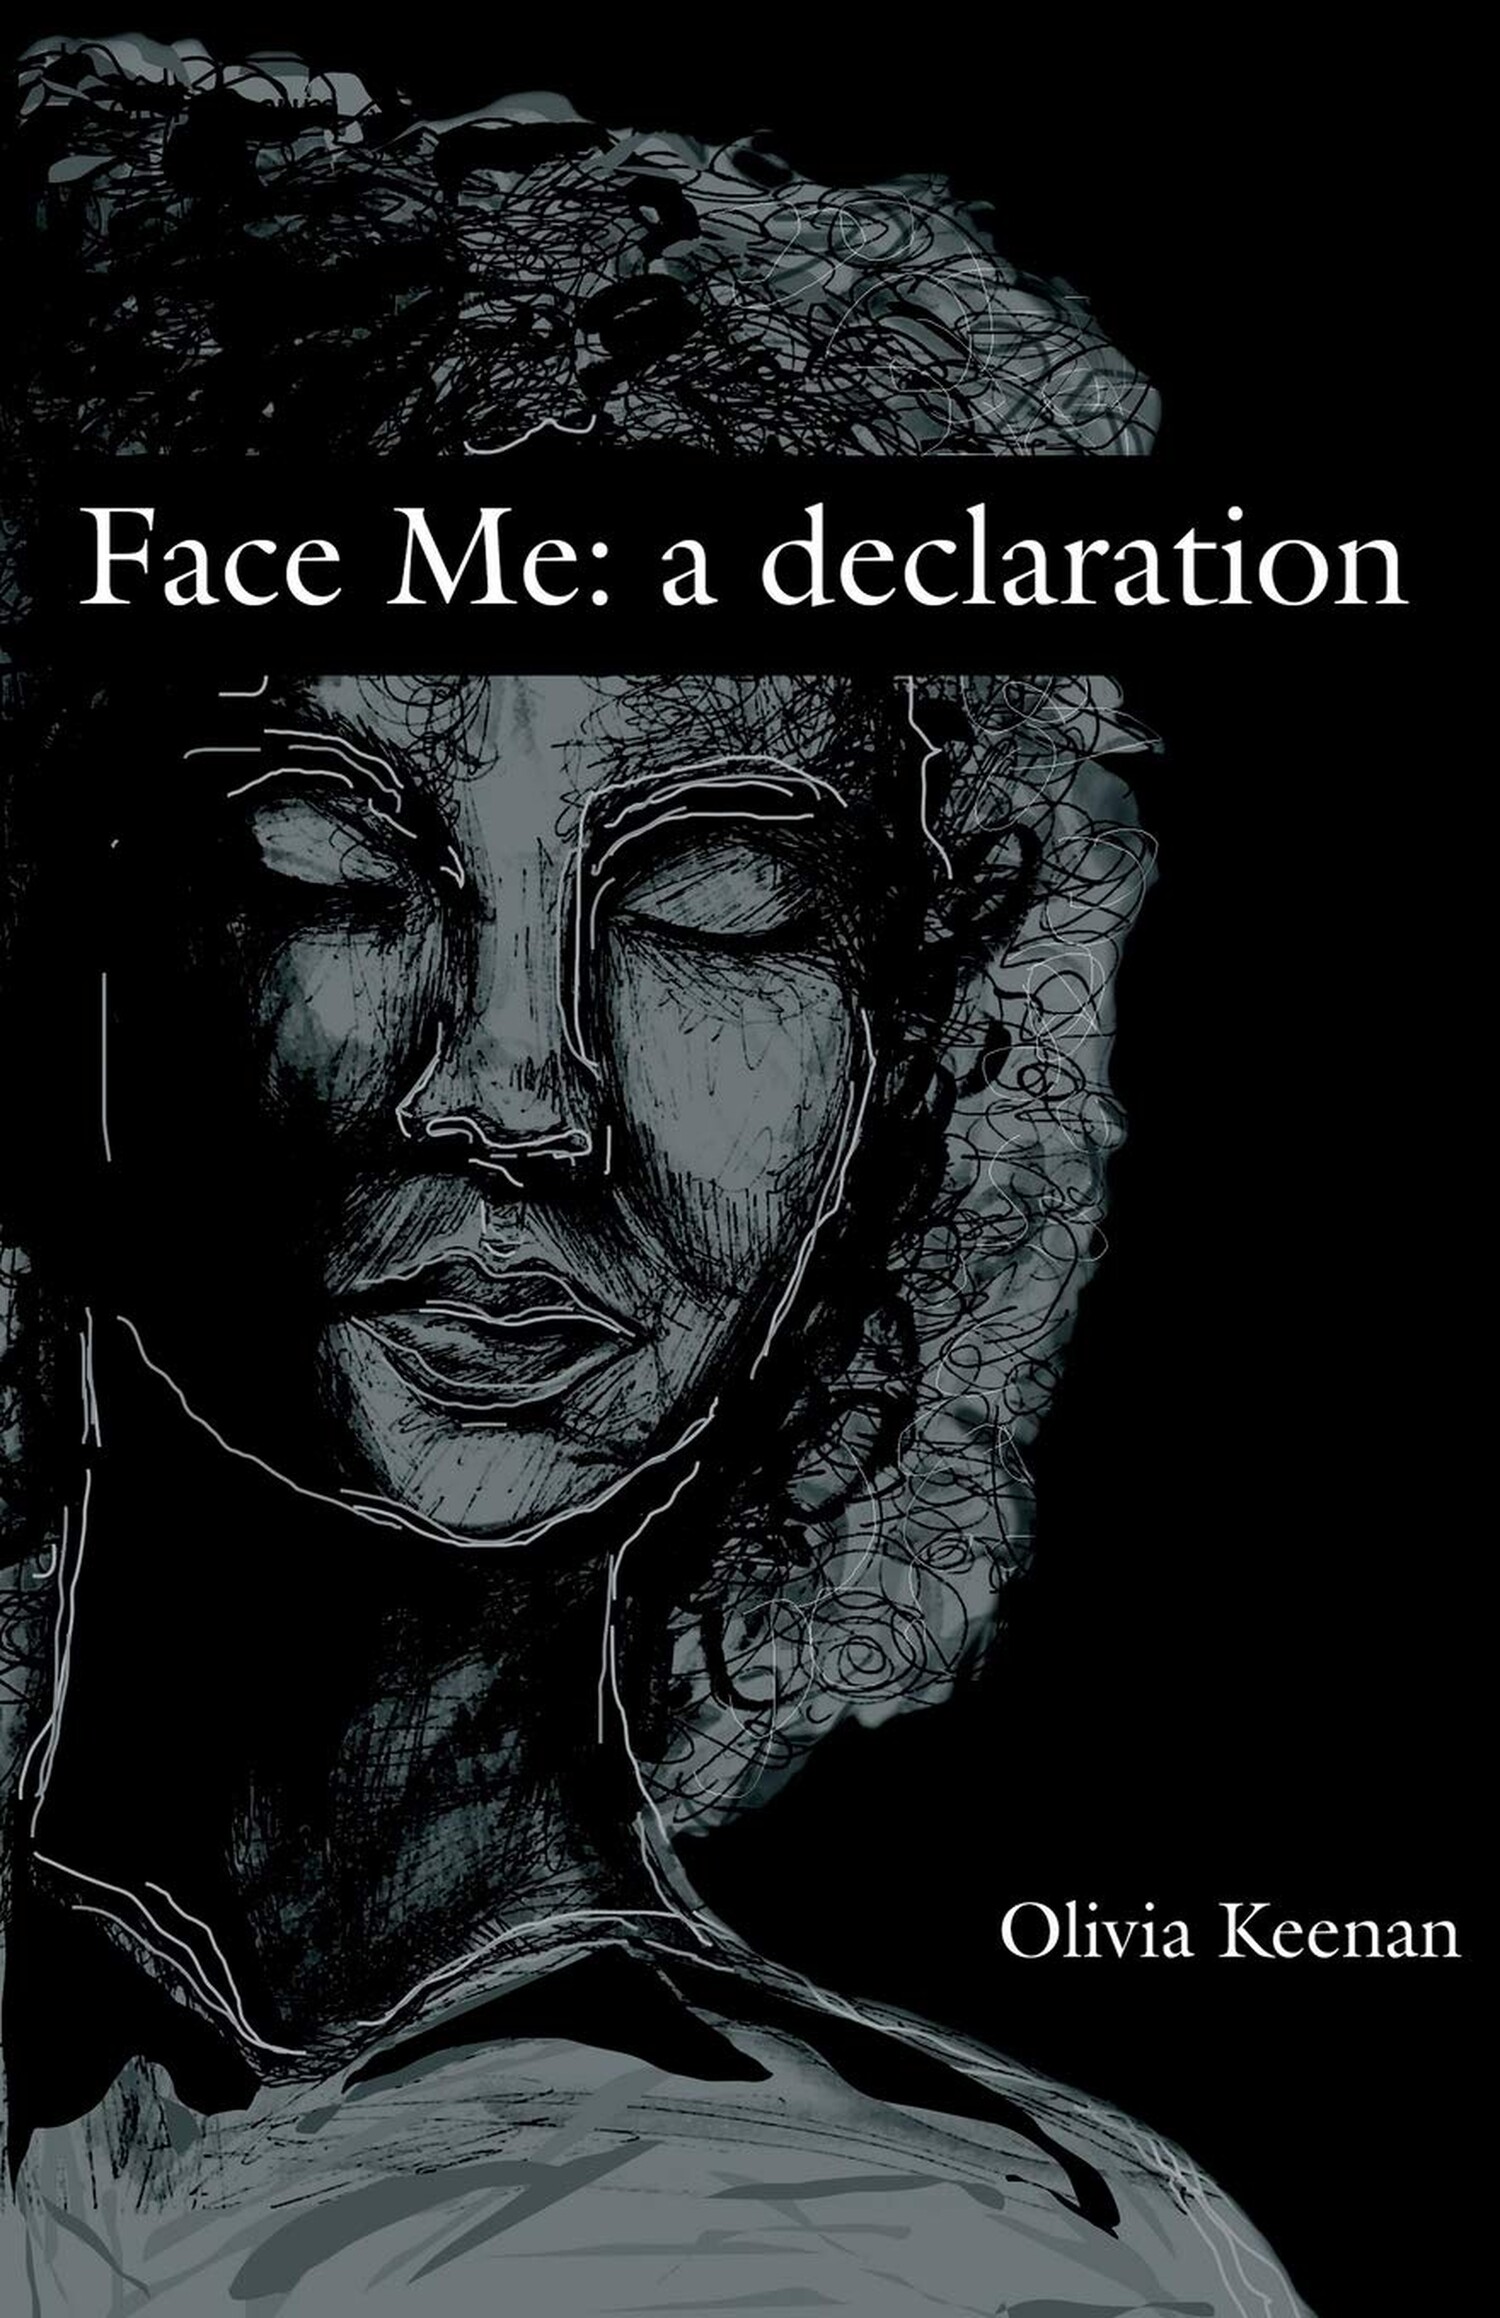 Face Me: a declaration by Olivia Keenan